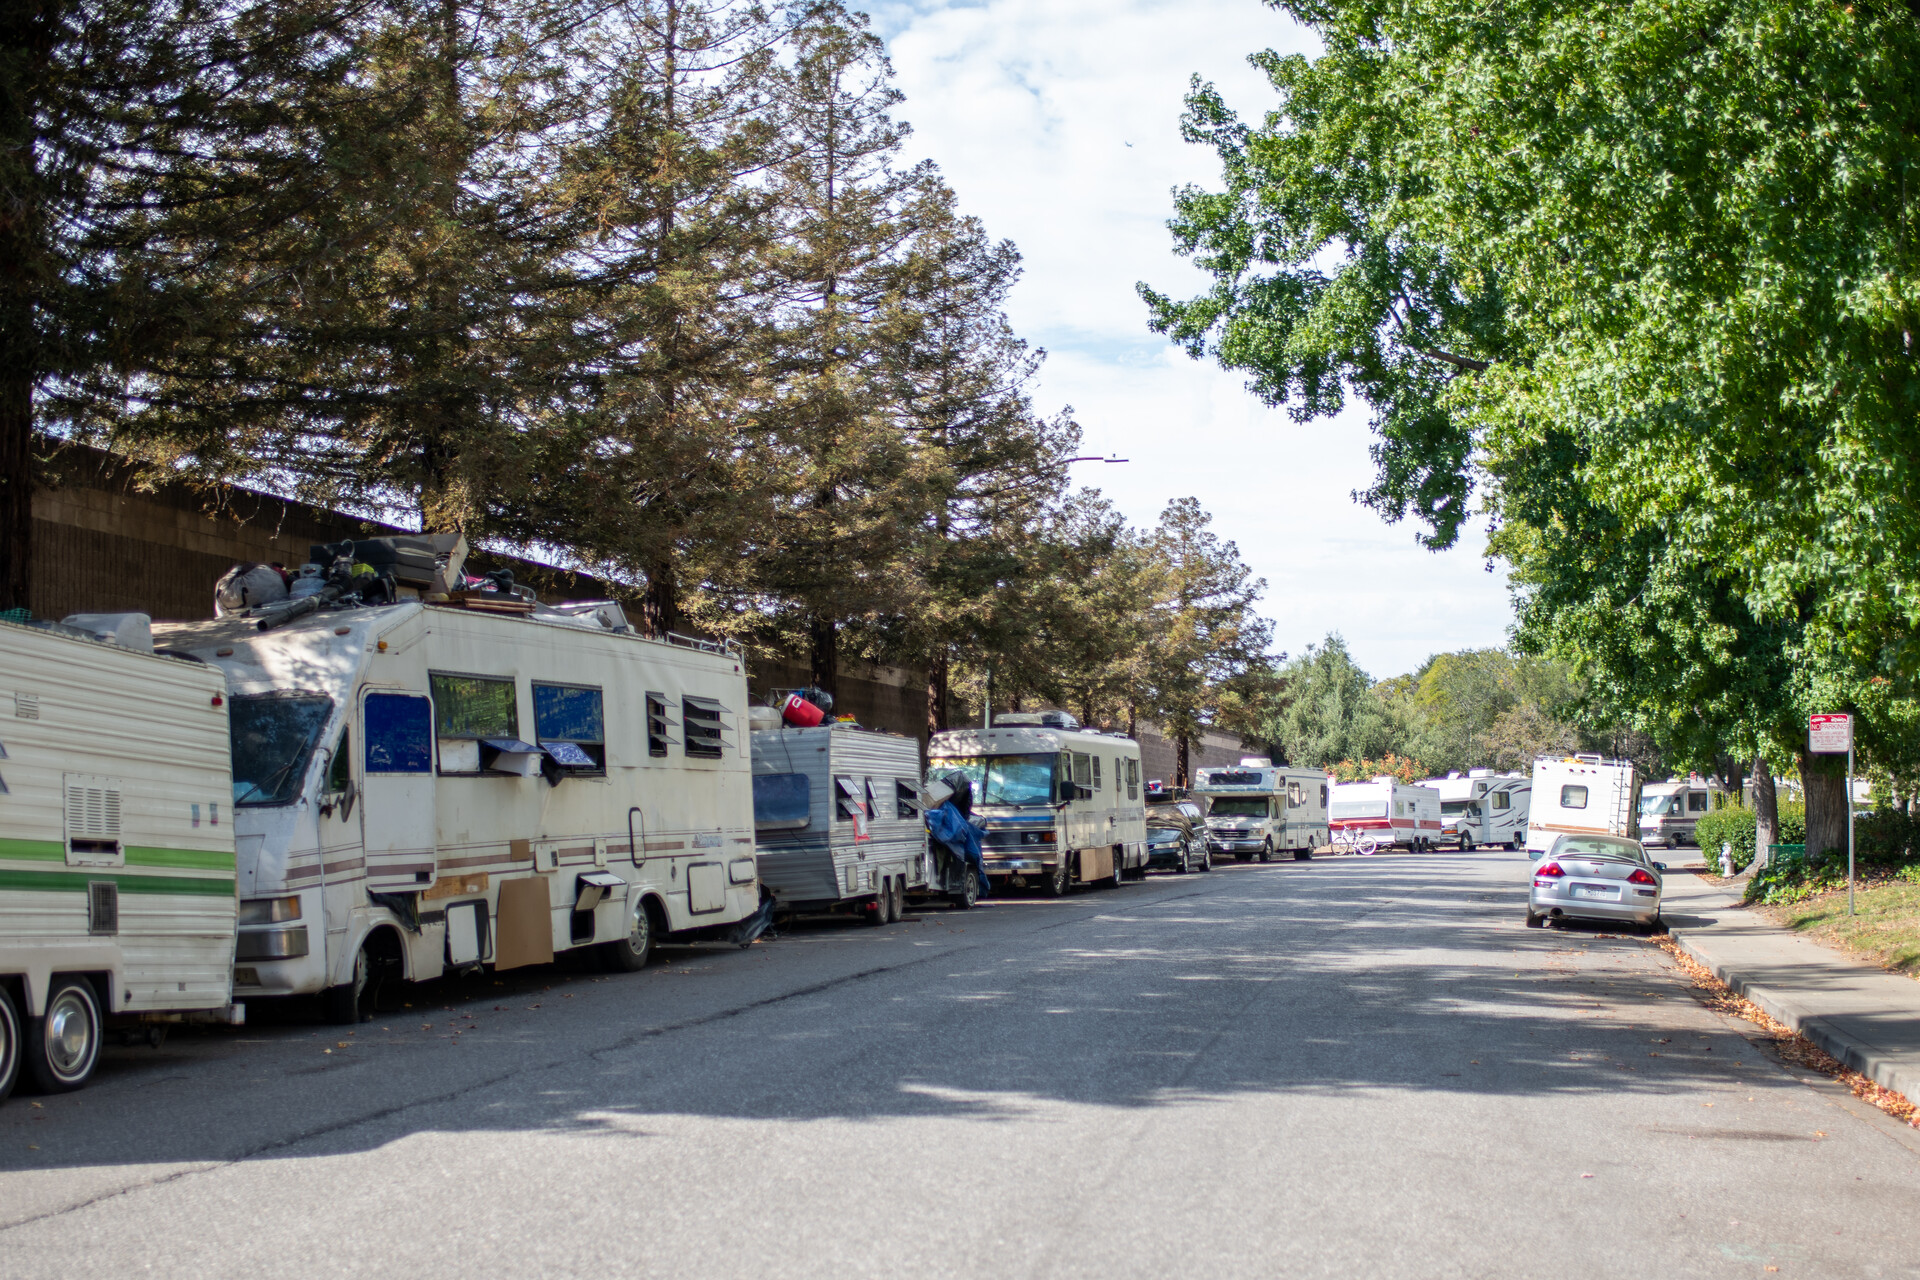 photo looking into the distance down a long street, with one side of the street completely lined with motorhomes